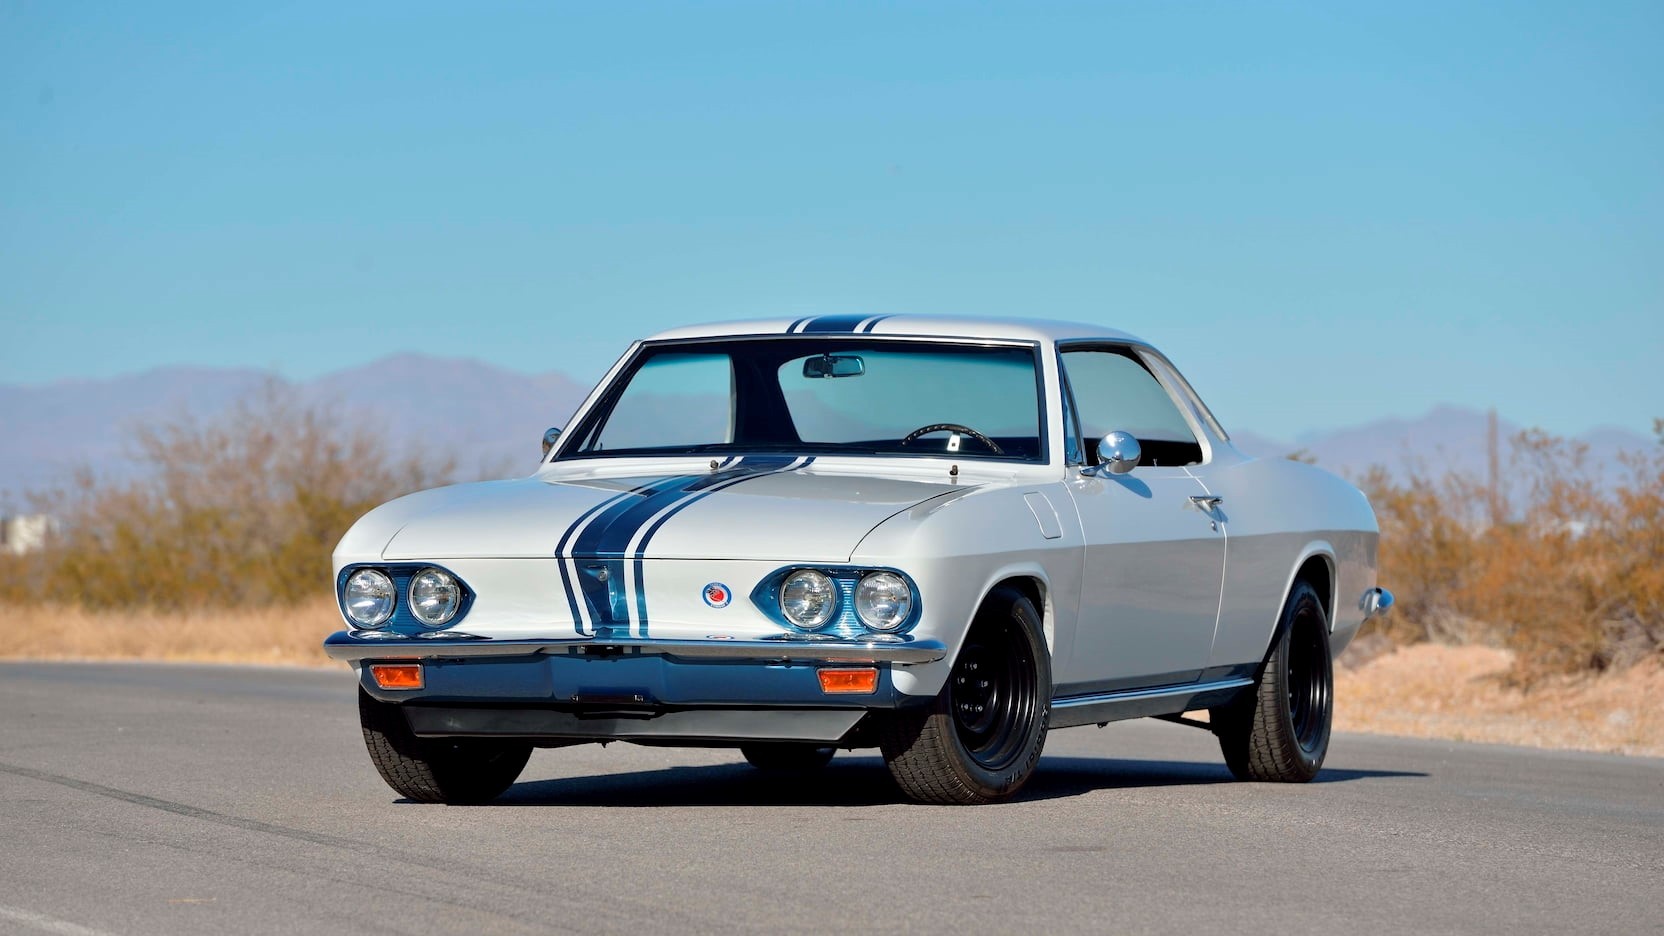 This 1966 Chevrolet Corvair Yenko Stinger Stage II Is All Original